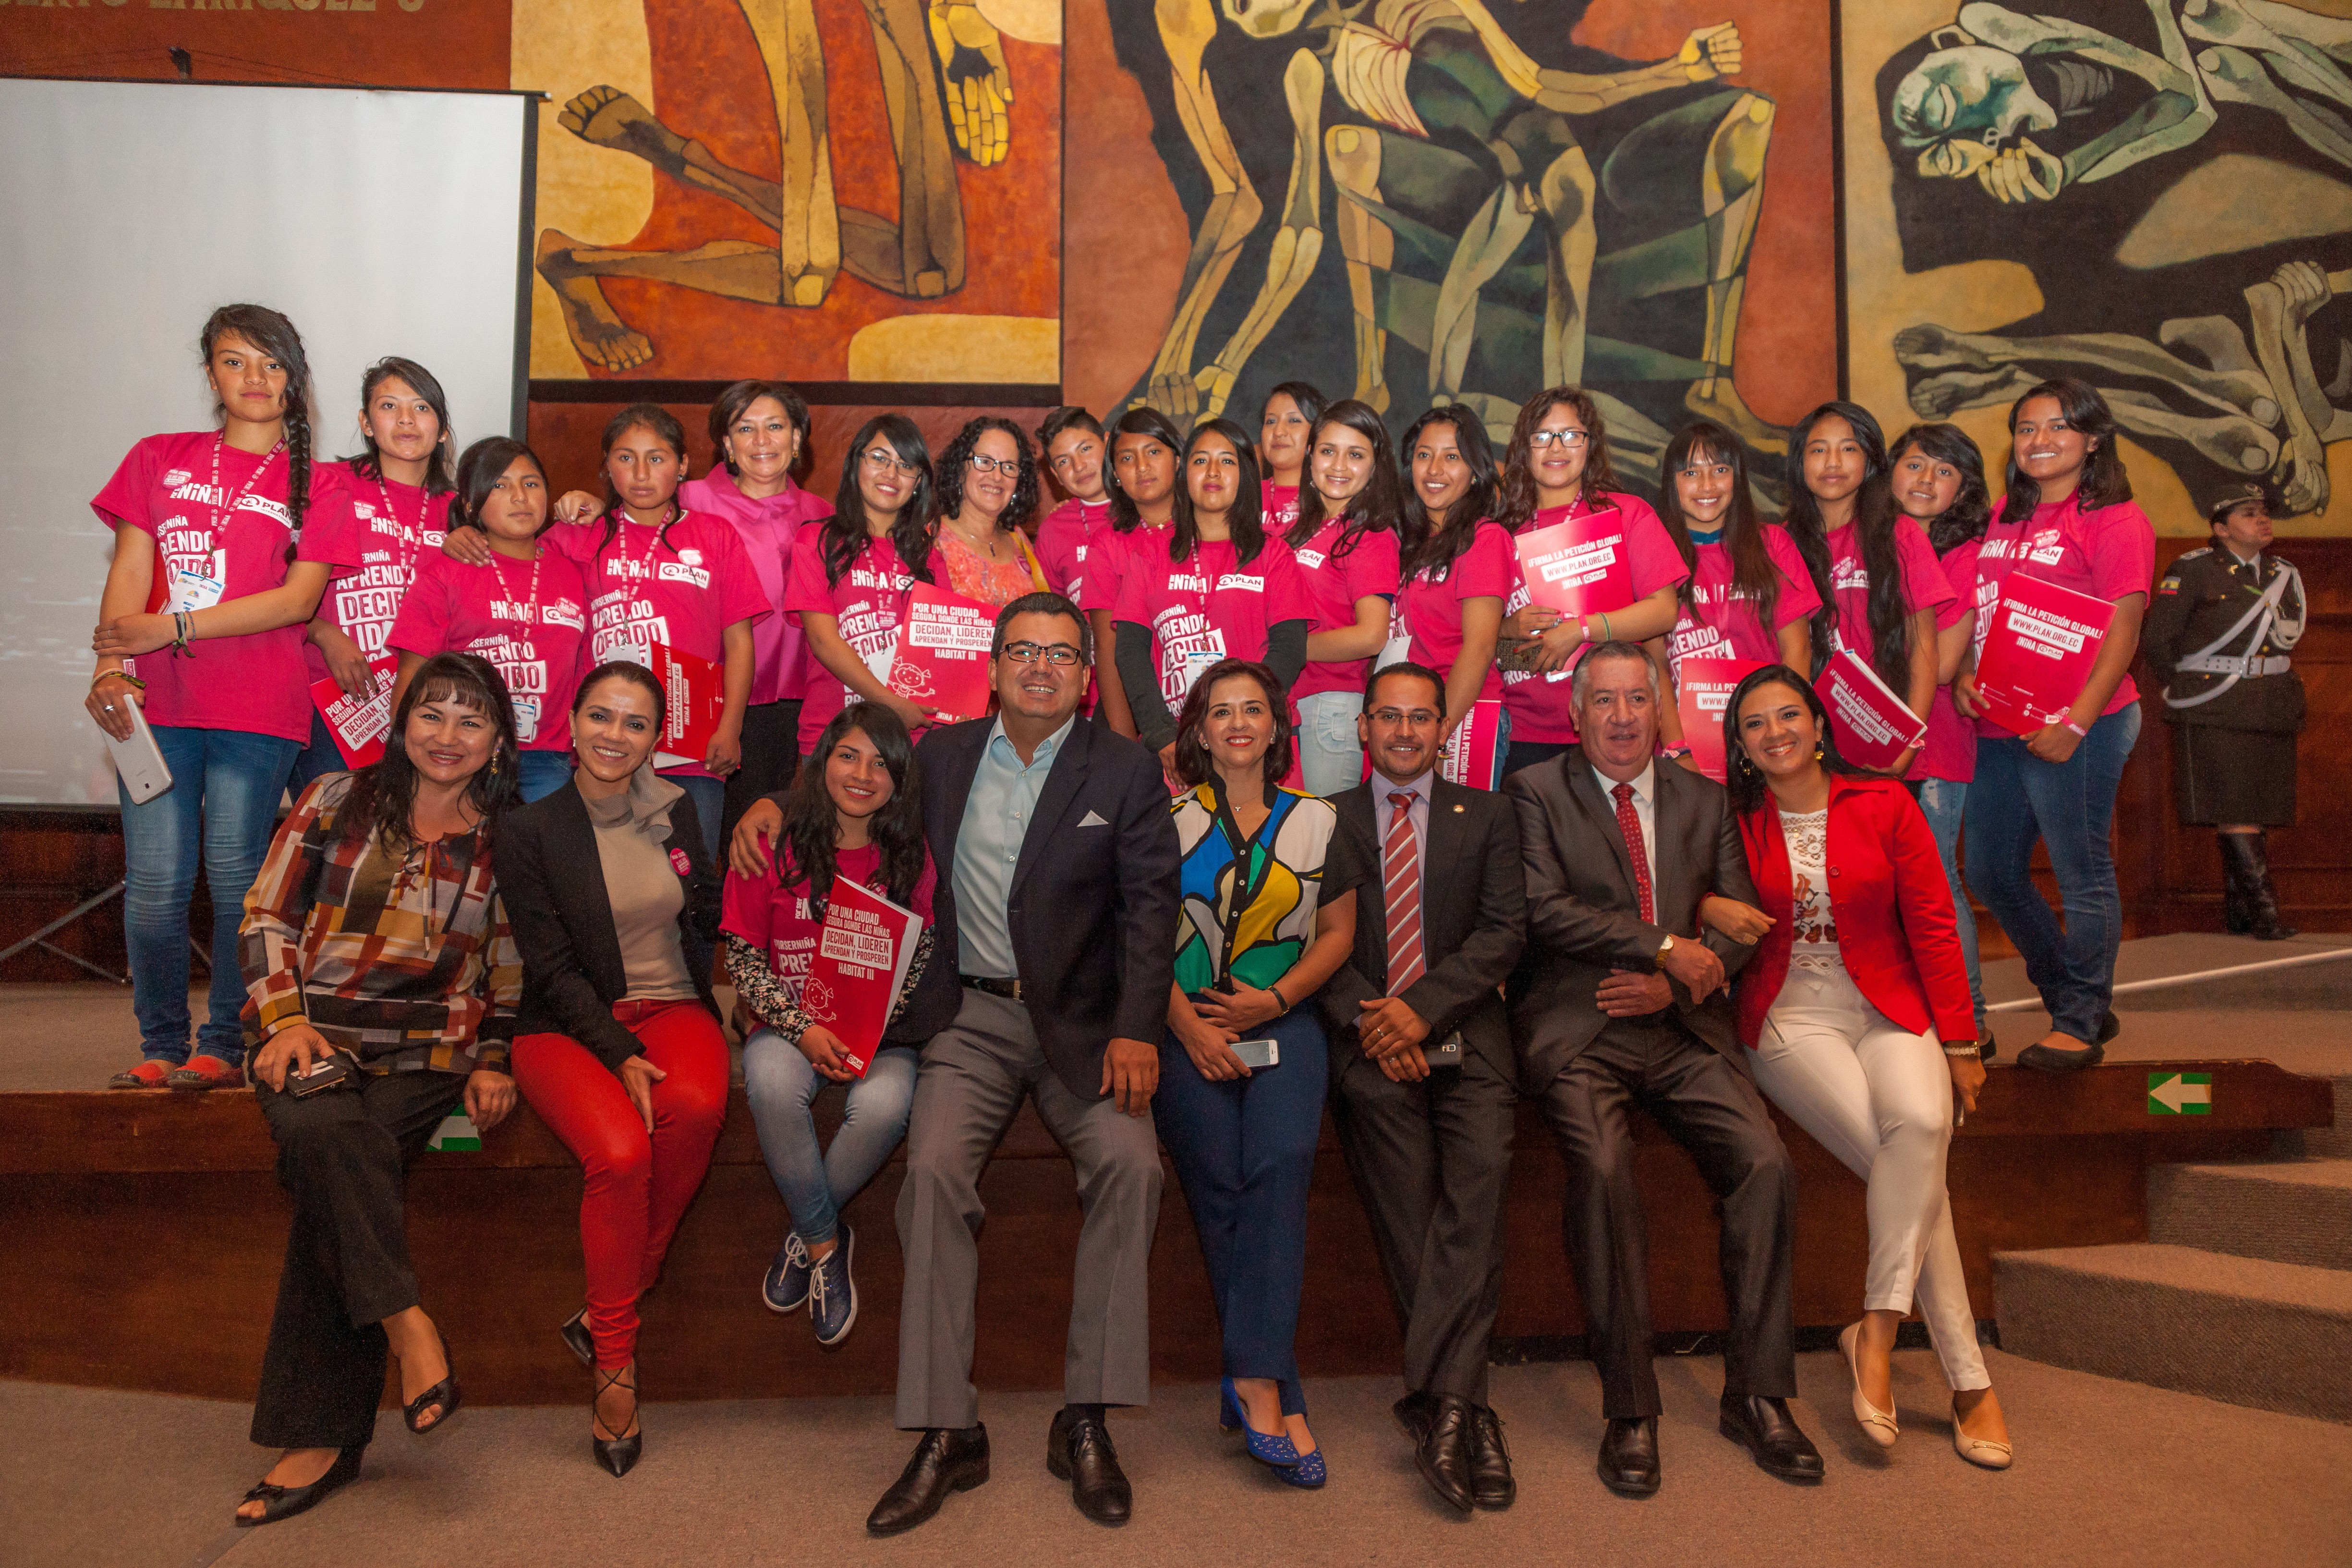 More than 100 girls took over the Ecuador National Assembly